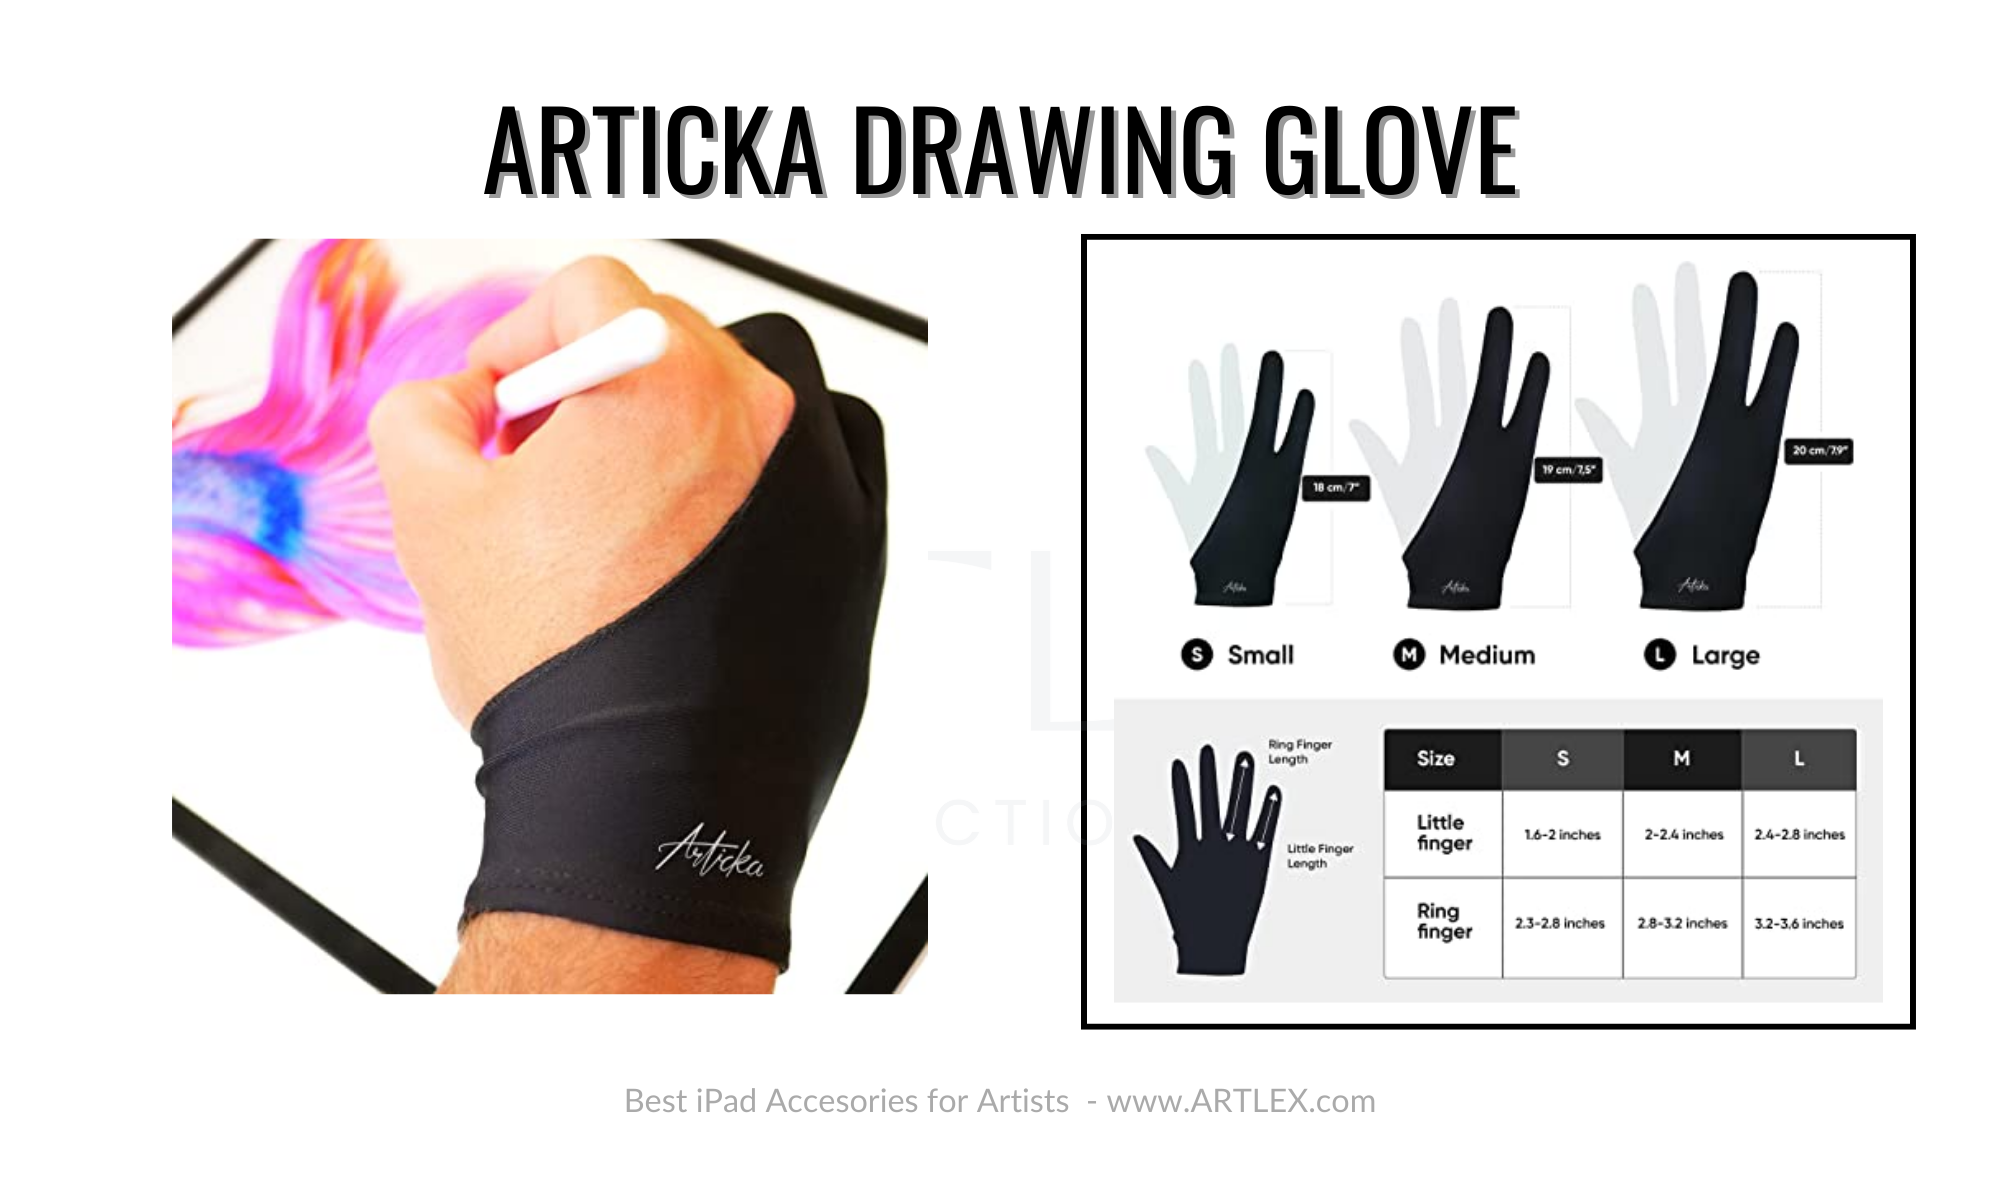 Best Drawing Glove for Size Variety - Articka Drawing Glove